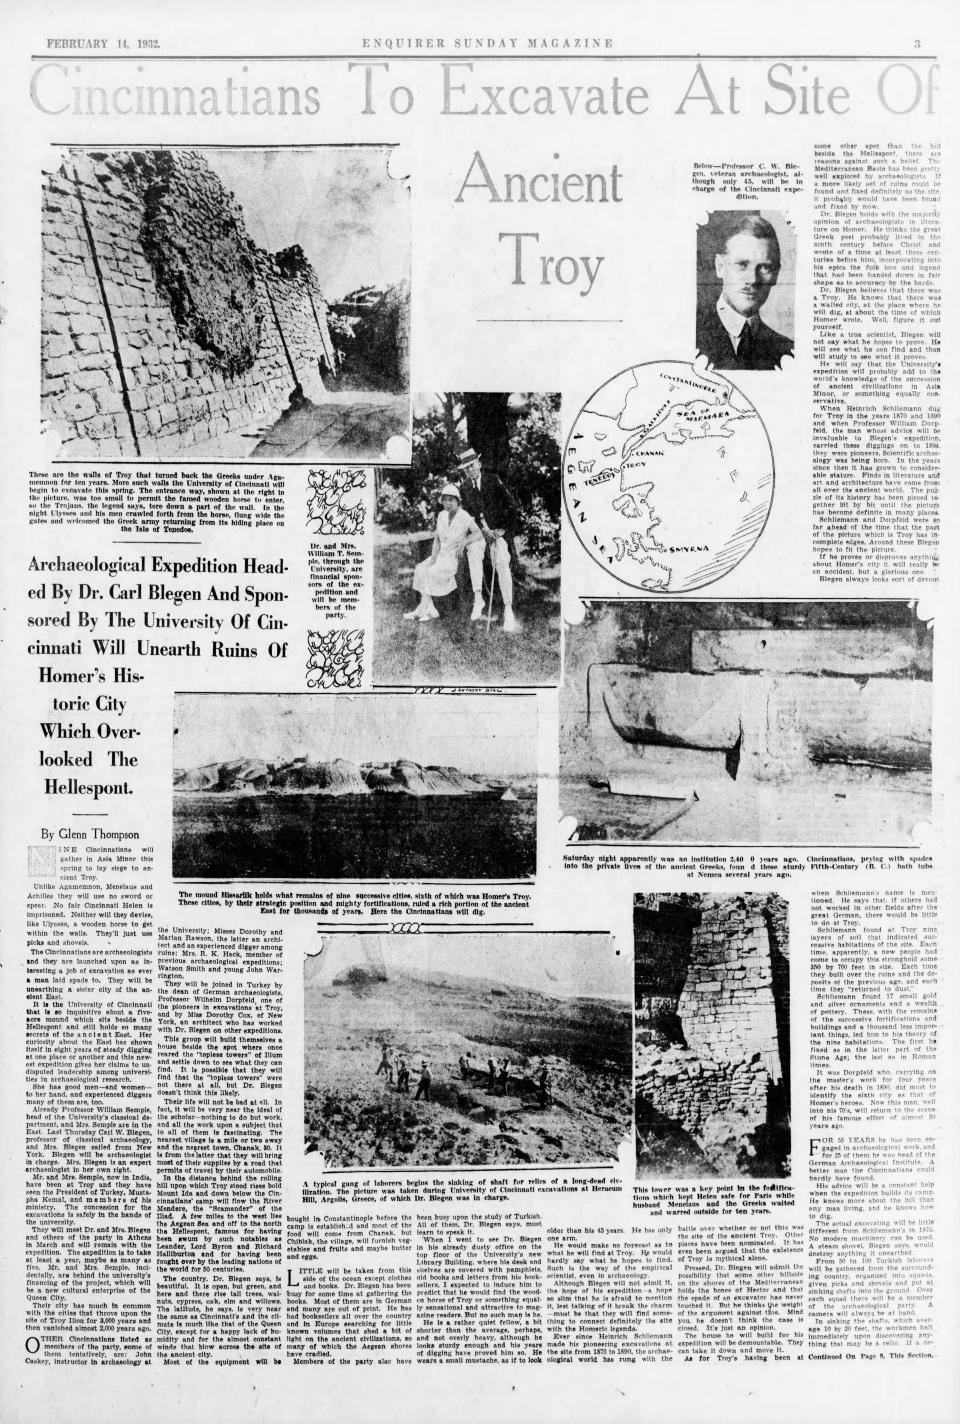 A feature story on the UC expedition to excavate Troy, from The Enquirer Sunday Magazine, Feb. 14, 1932.